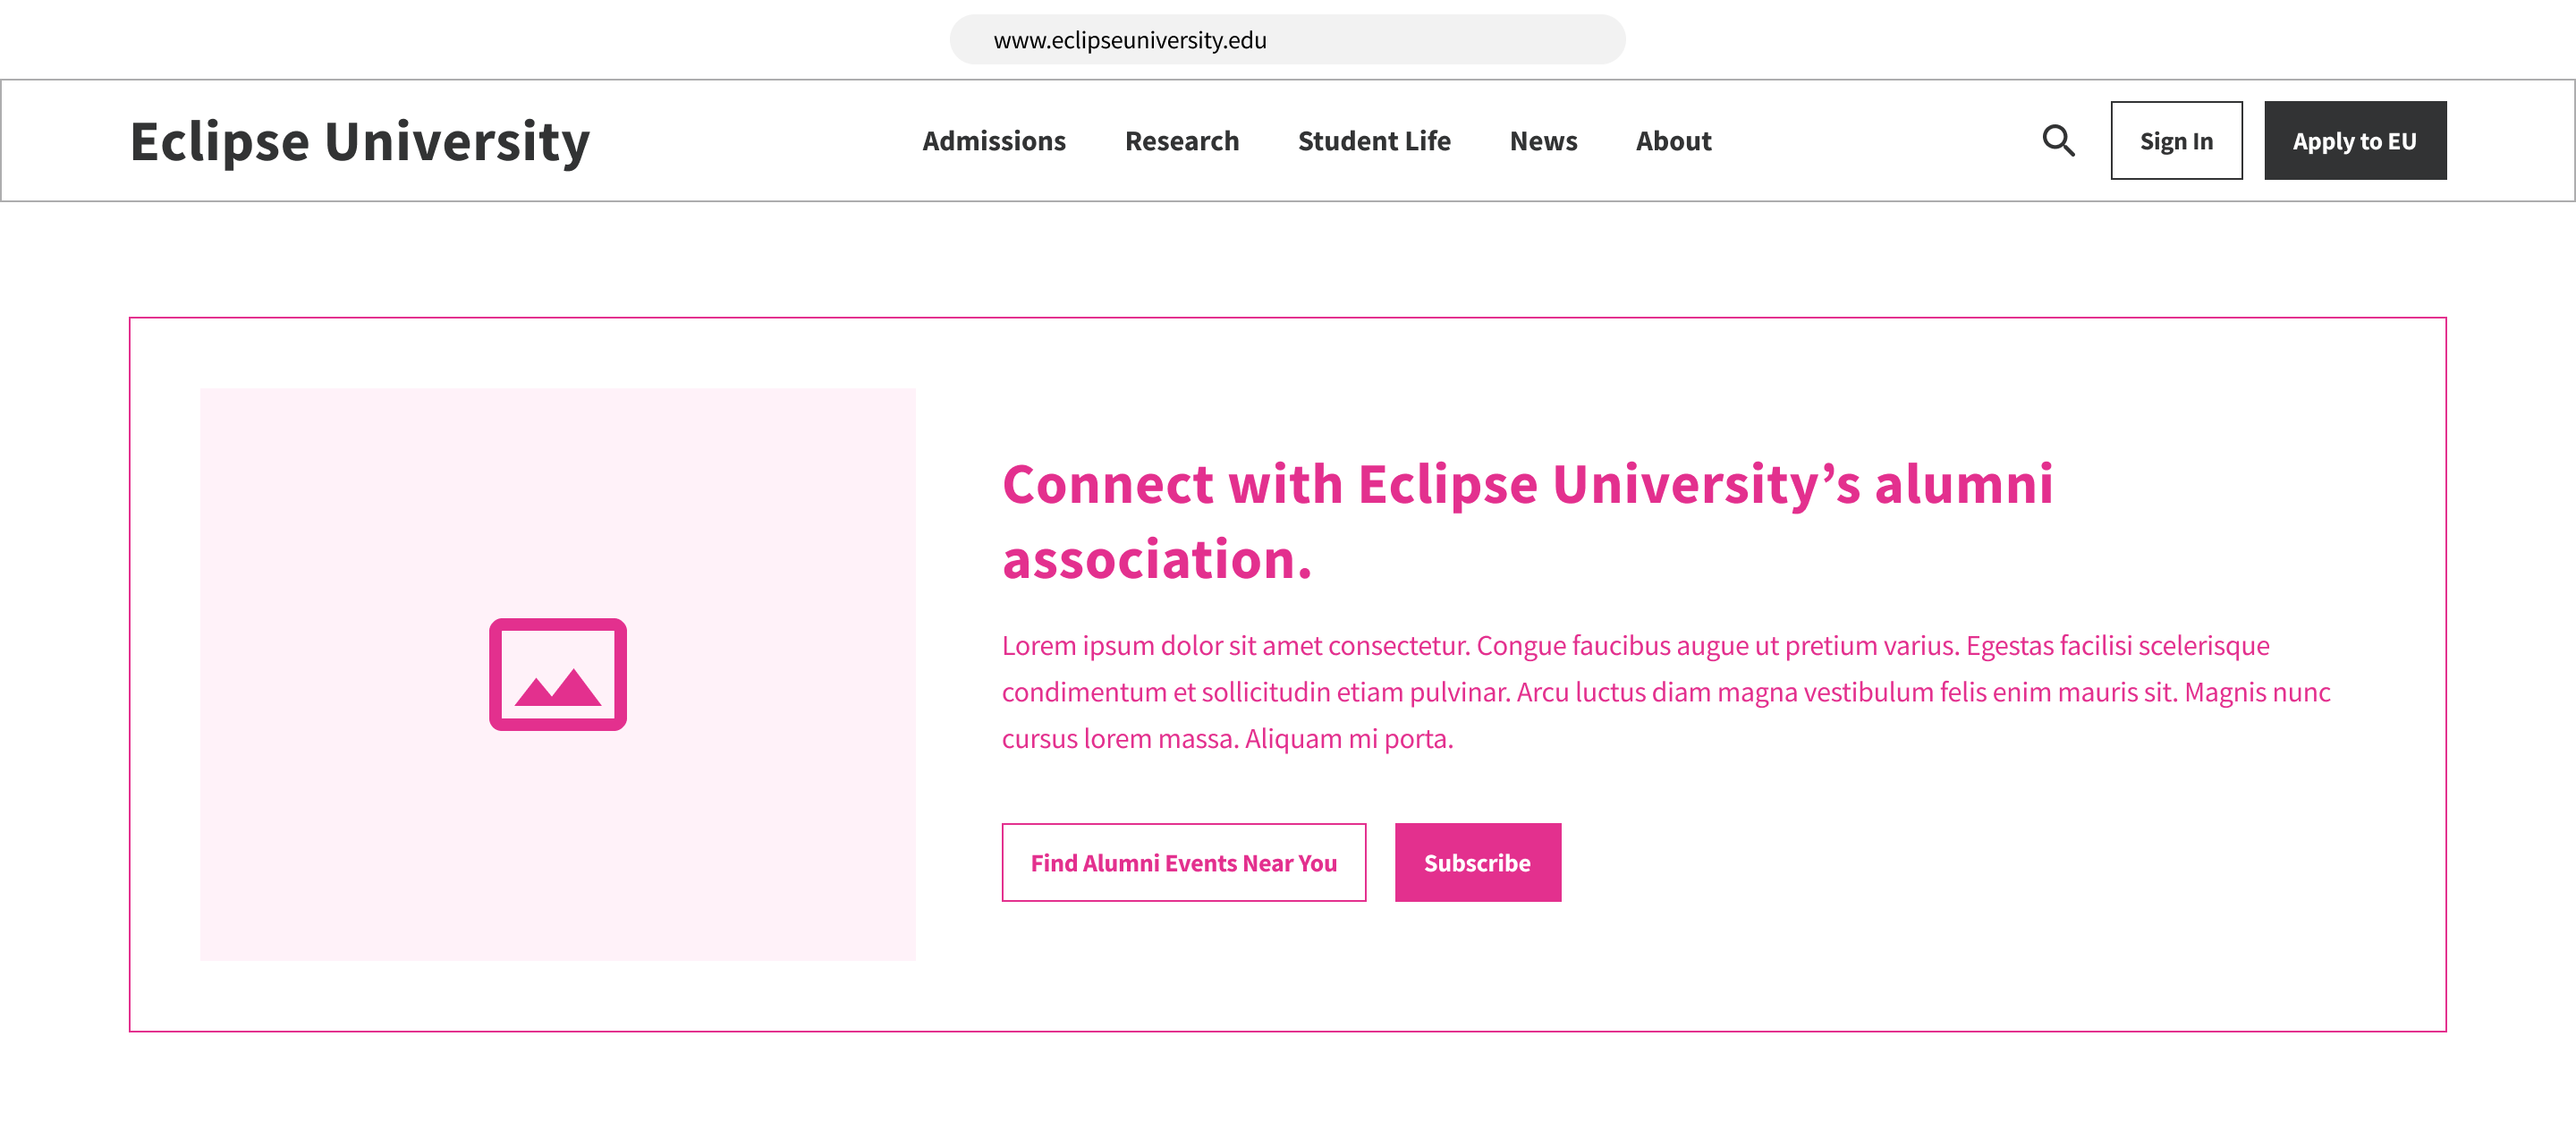 A wireframe with a 'Subscribe' button to receive alumni association news, and a 'Find Alumni Events Near You' button..